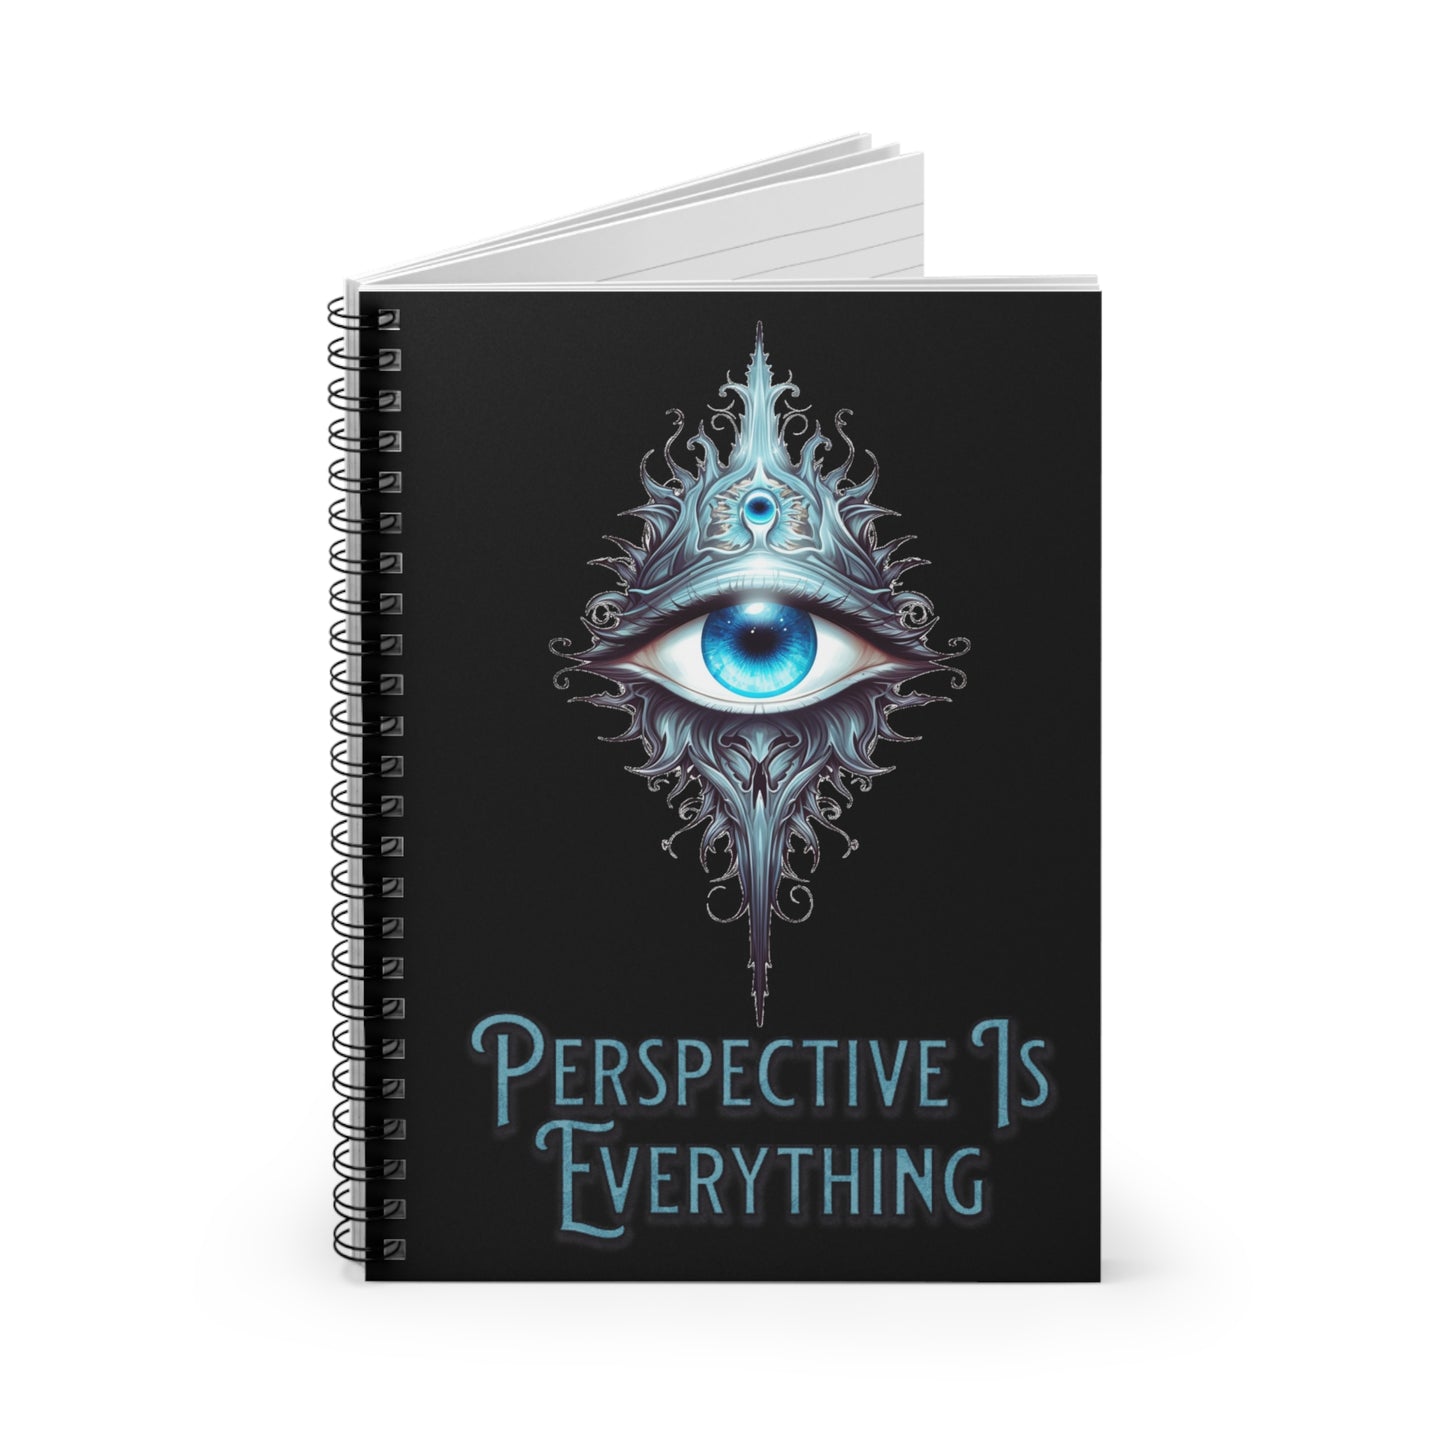 Perspective is Everything: Teal | Spiral Notebook - Ruled Line